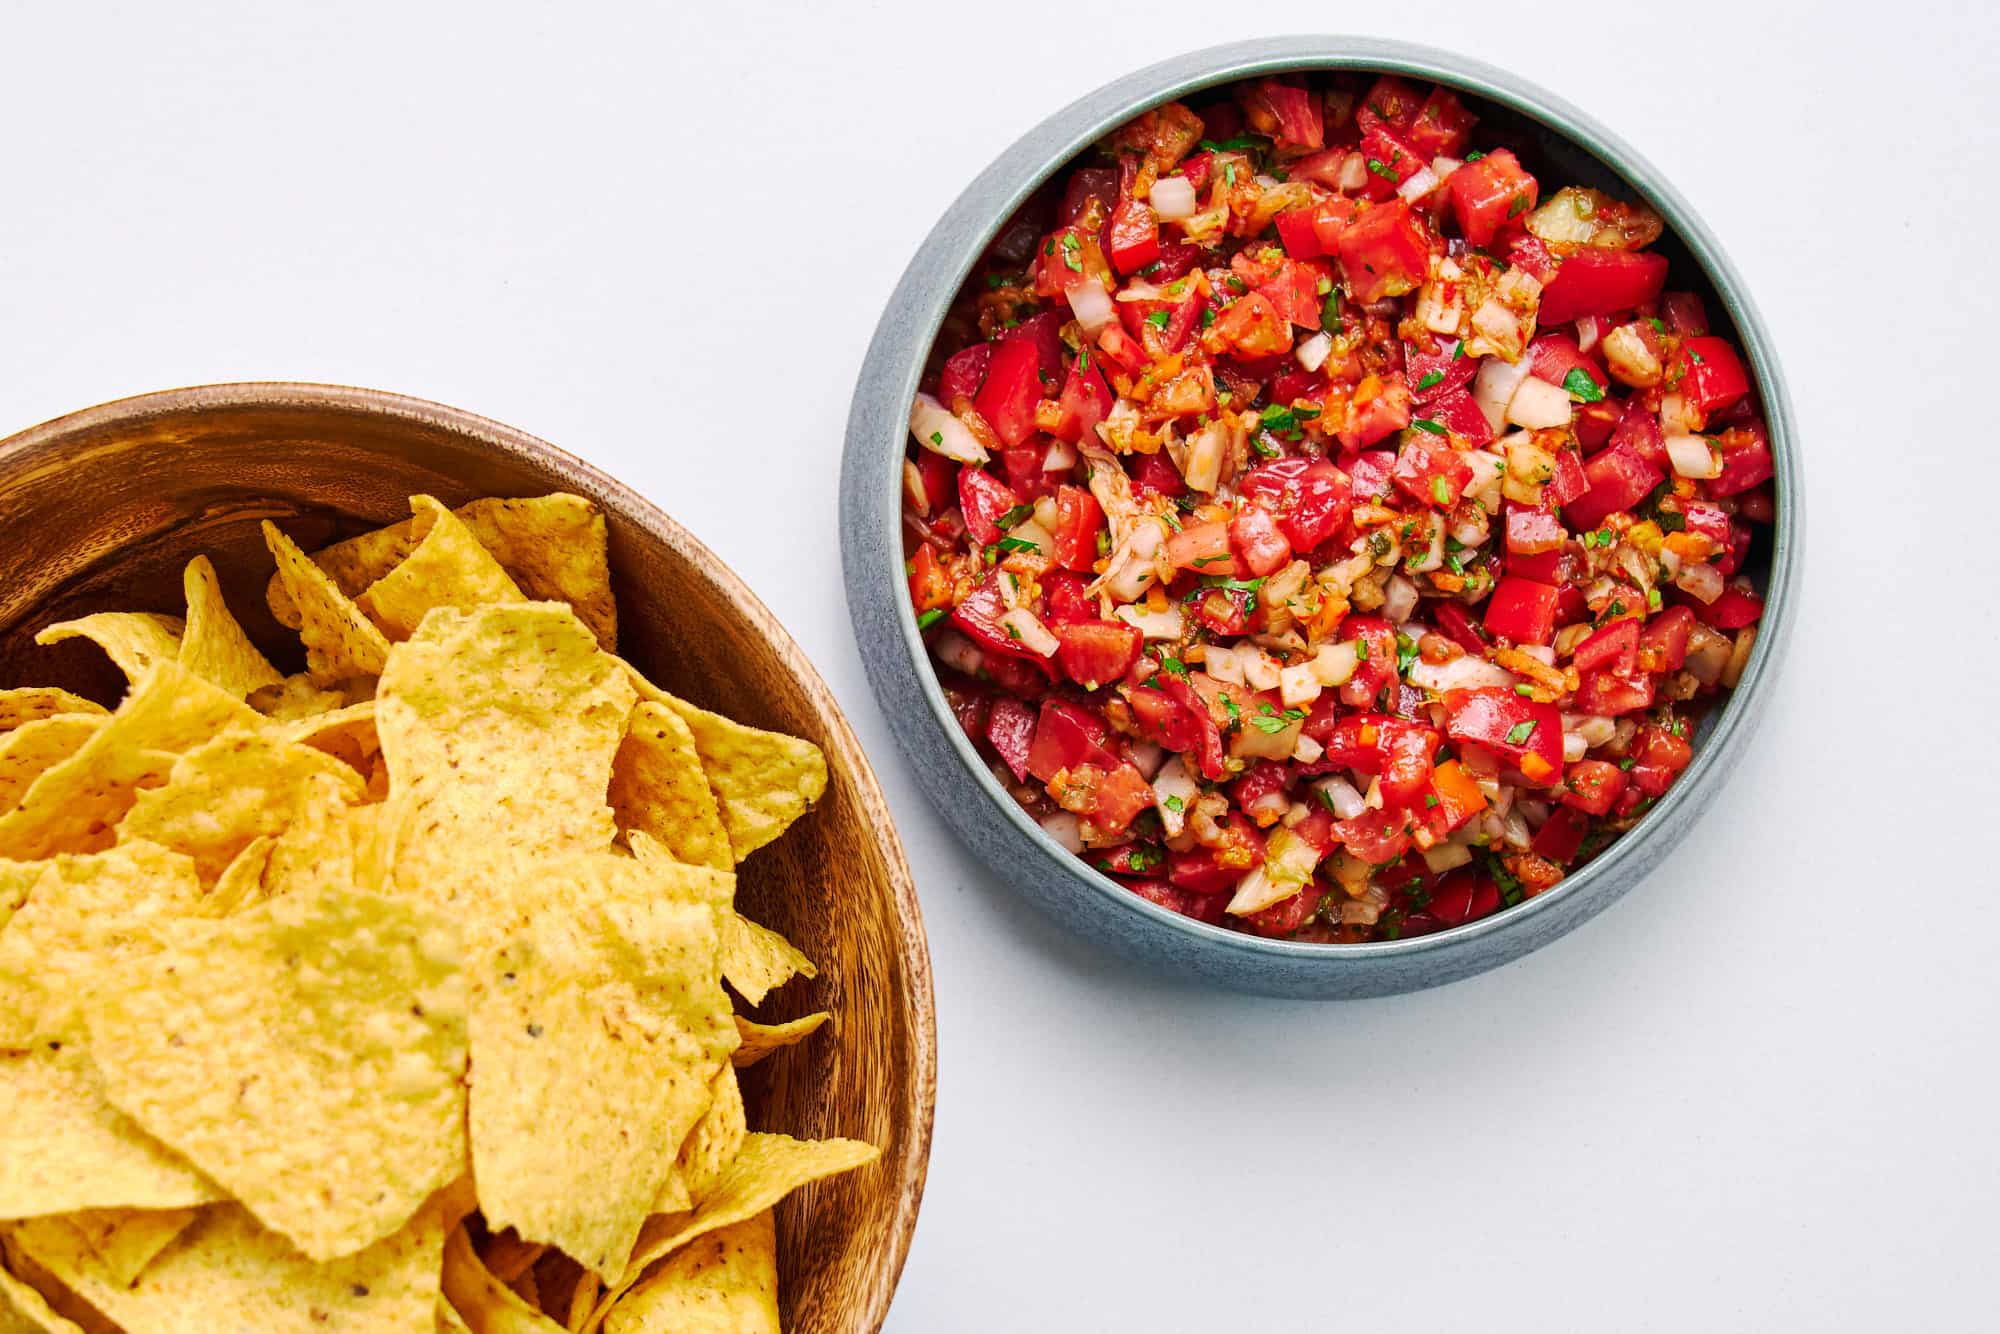 Spicy kimchi salsa with tortilla chips.